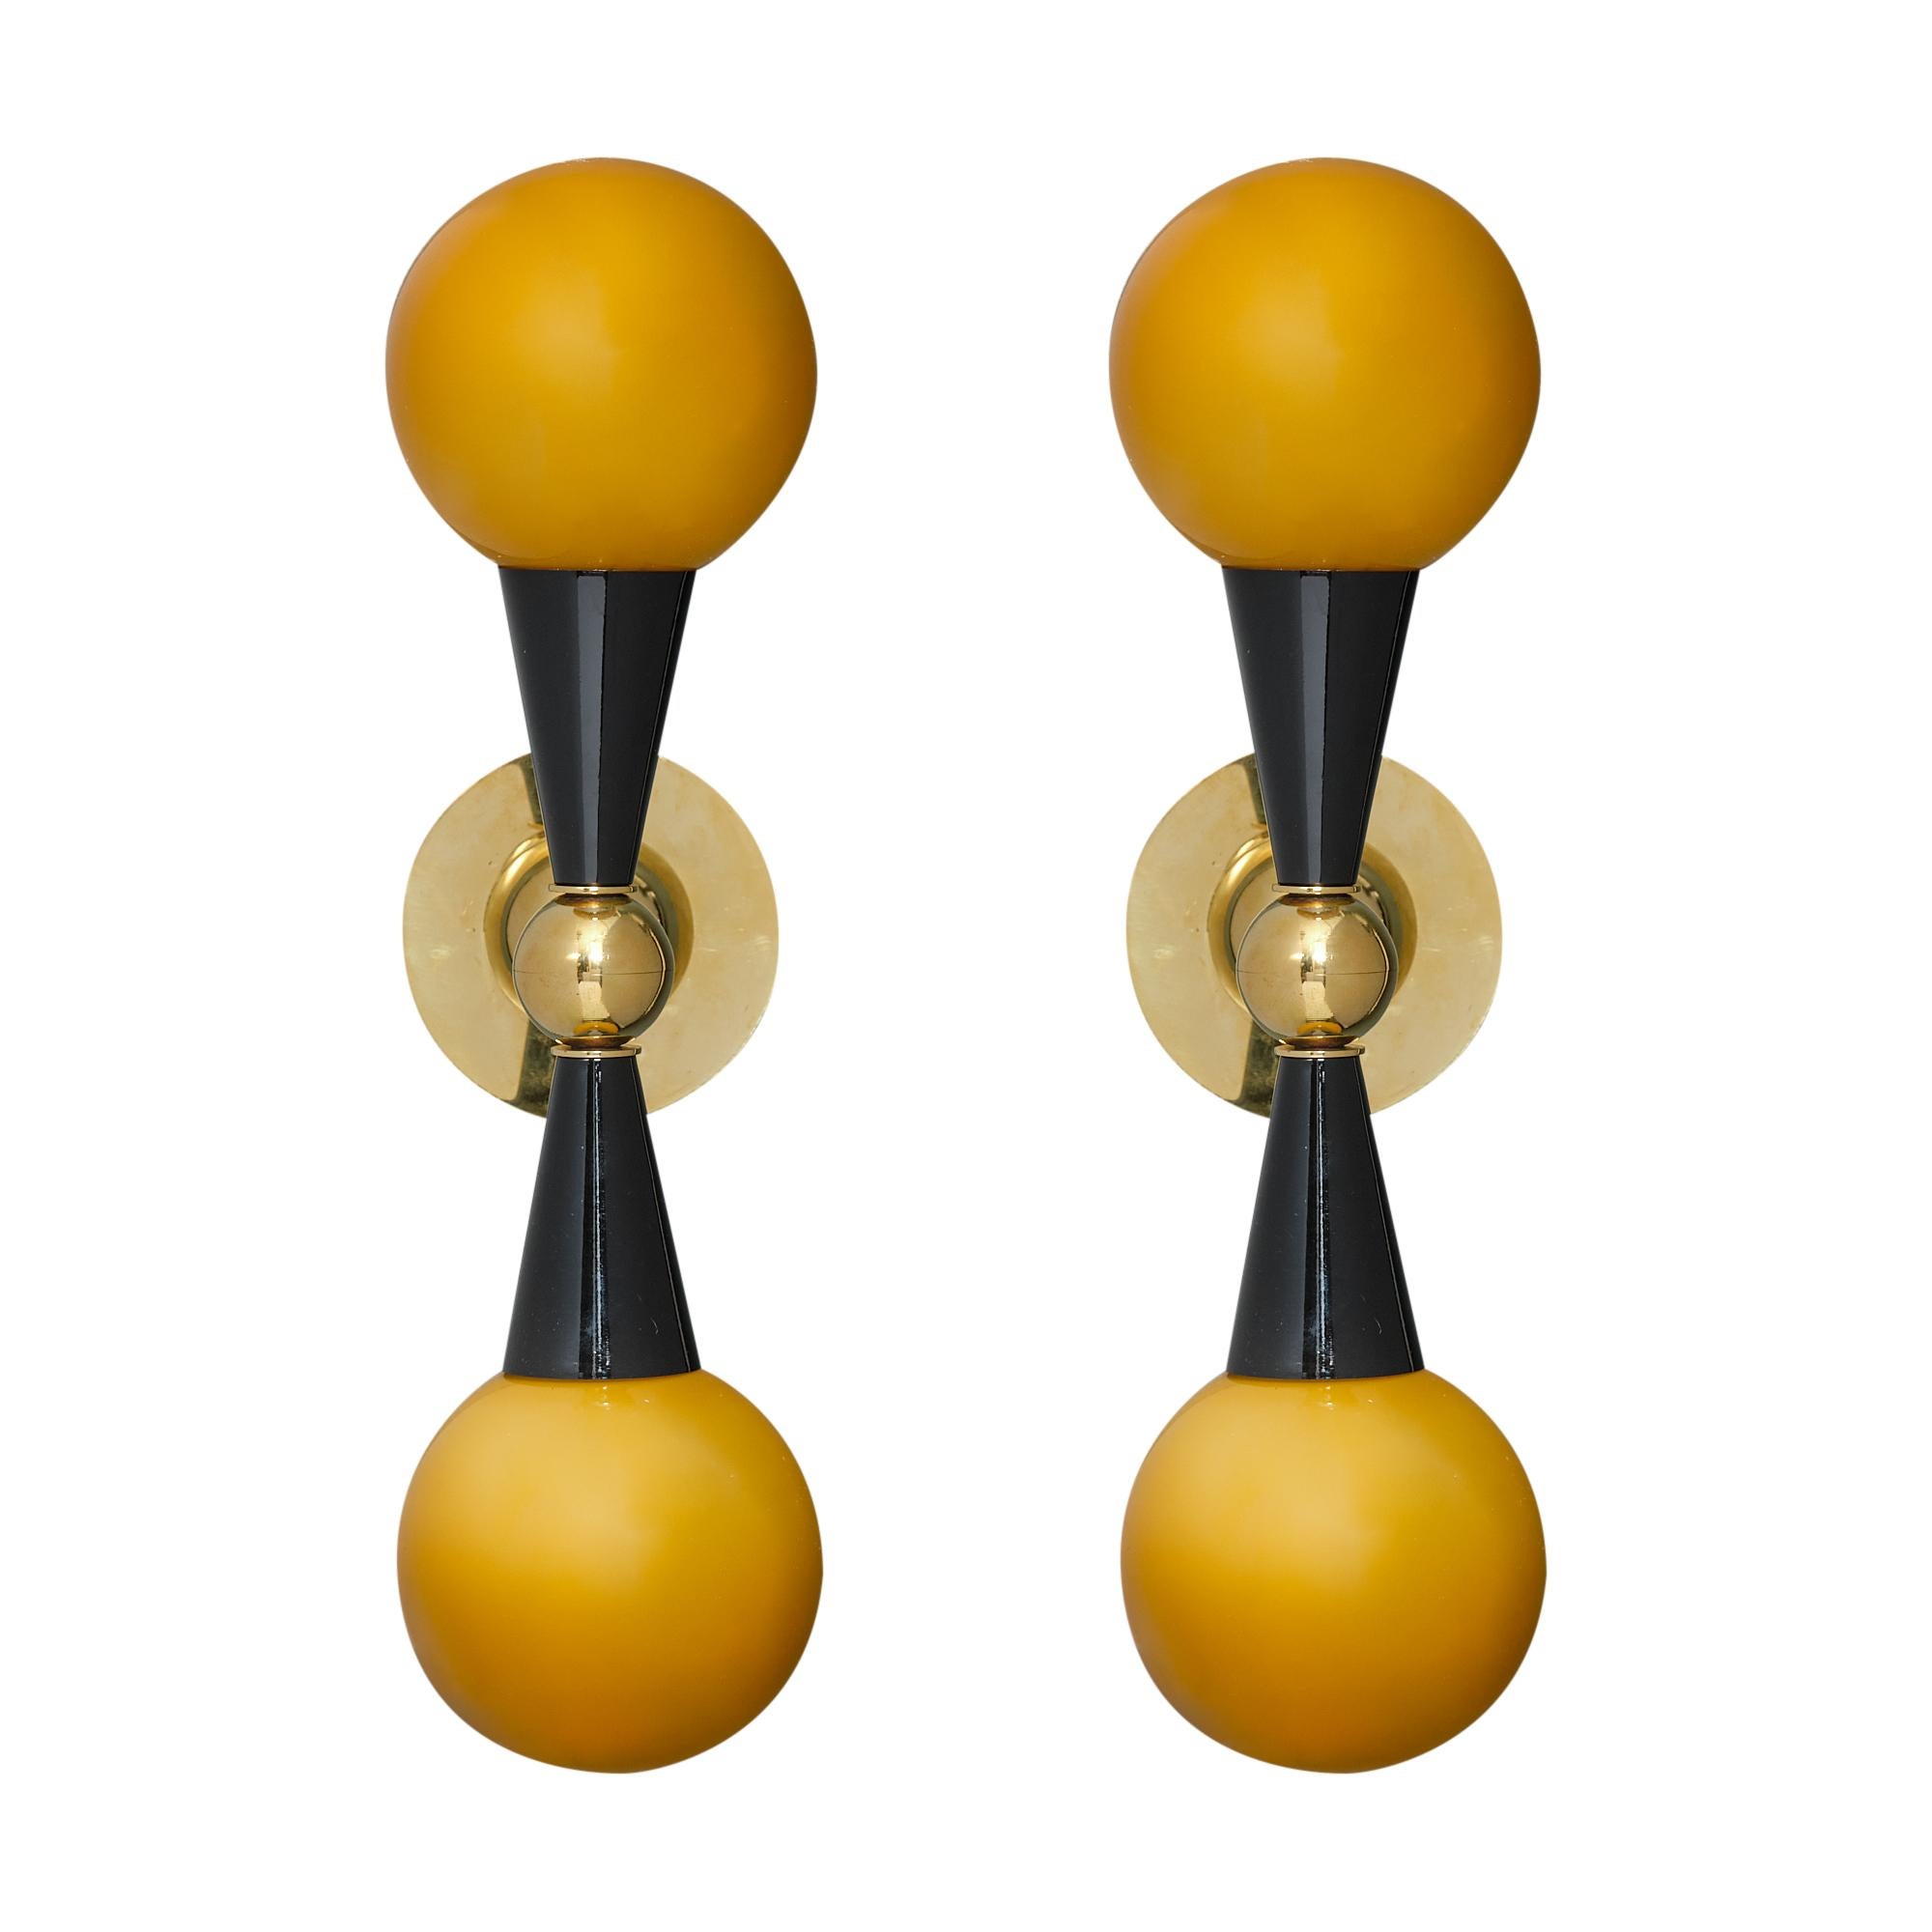 Italian Mid-Century Modern style wall sconces in the manner of Stilnovo. Murano glass globes and black laquered cones extend from a brass structure to create each of these stunning lights. The cones hold a hand-blown “Incamiciato” glass sphere. Each